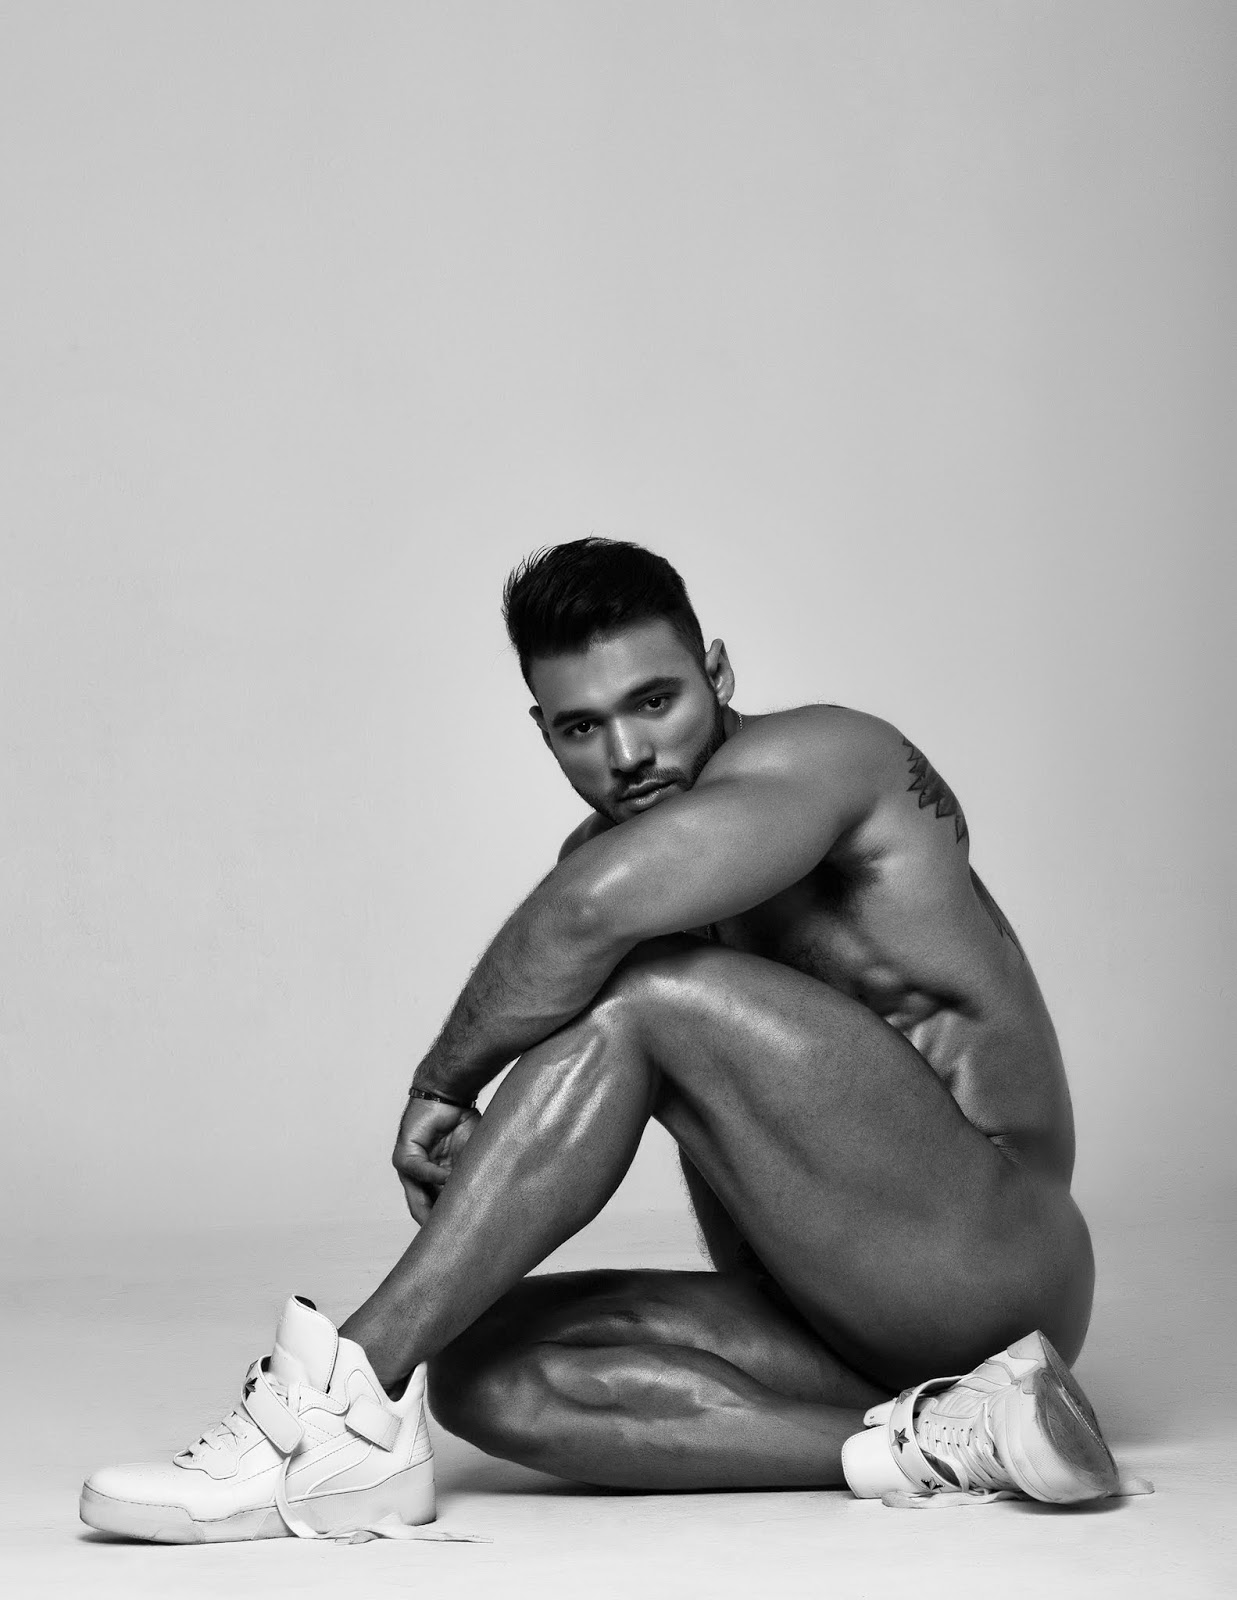 AlfreD HerrerA, by Joan Crisol ft Alfred Herrera exclusive for LOVE|SEXO Magazine (NSFW).